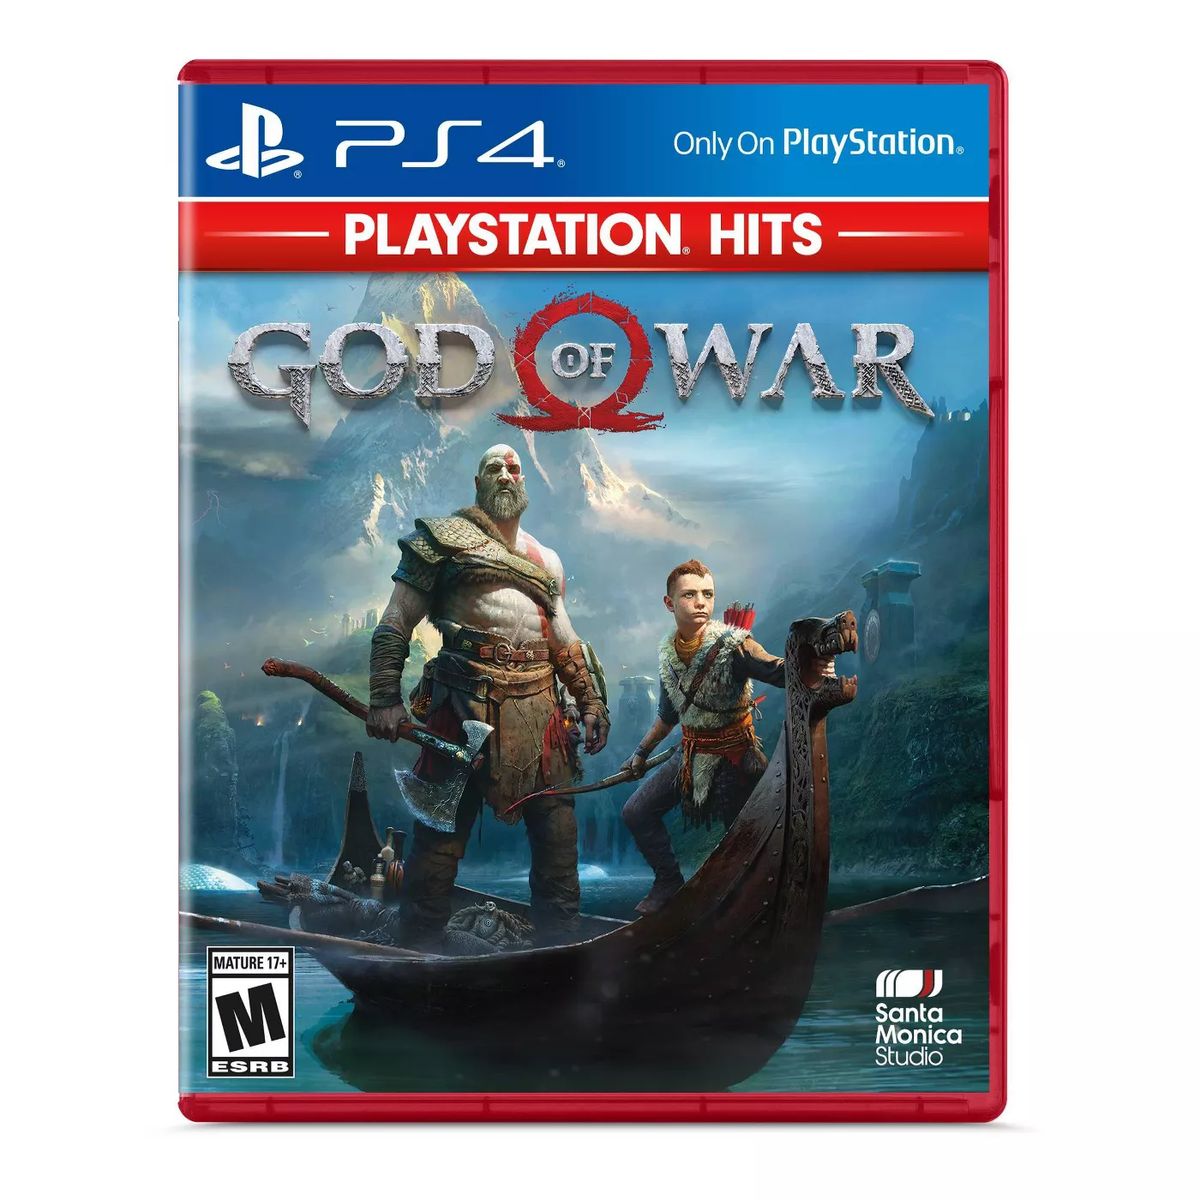 ps4 games coming soon amazon